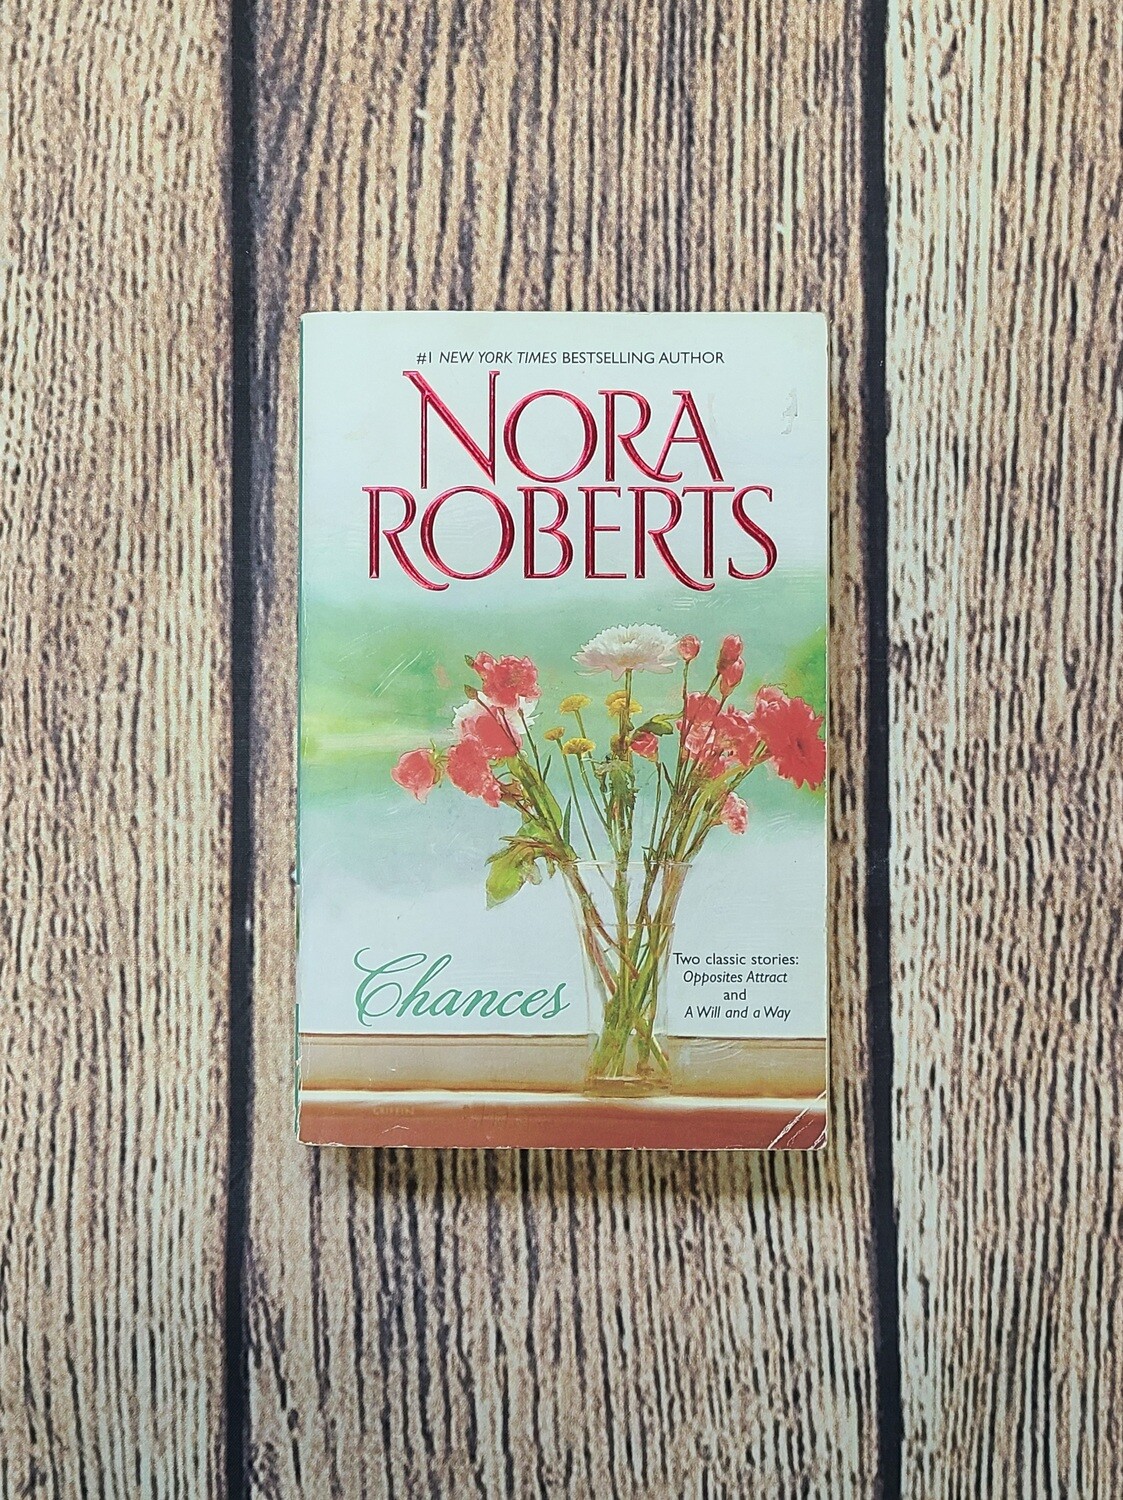 Chances by Nora Roberts